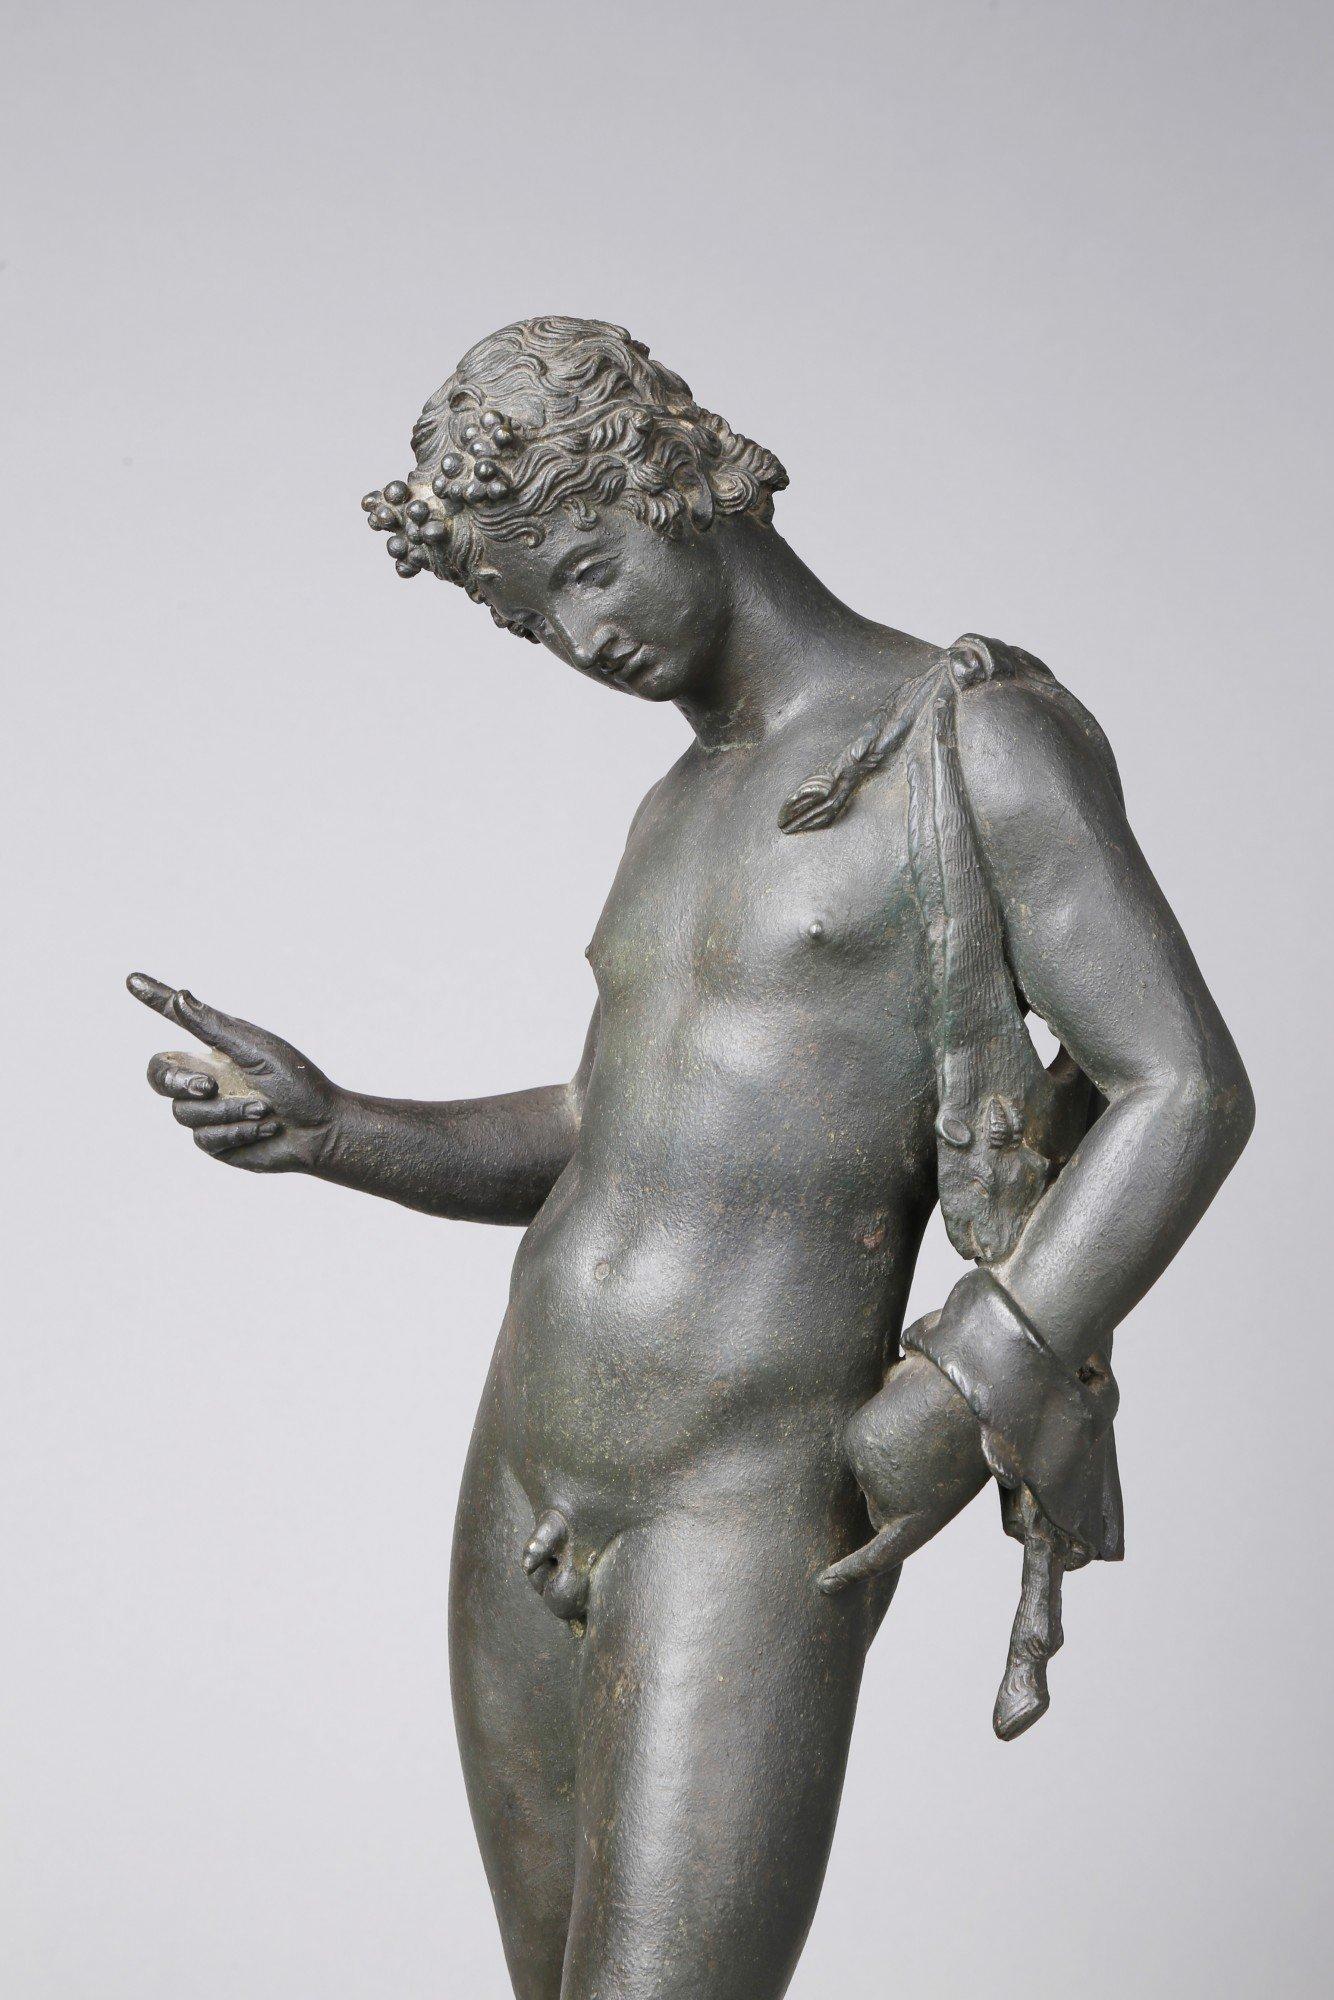 19th Century Italian School
Grand Tour Bronze Sculpture of Dionysus, 19th Century
Bronze with black-green patination
24 x 10 x 10 inches

Dionysus, in Greco-Roman religion, a nature god of fruitfulness and vegetation, especially known as a god of